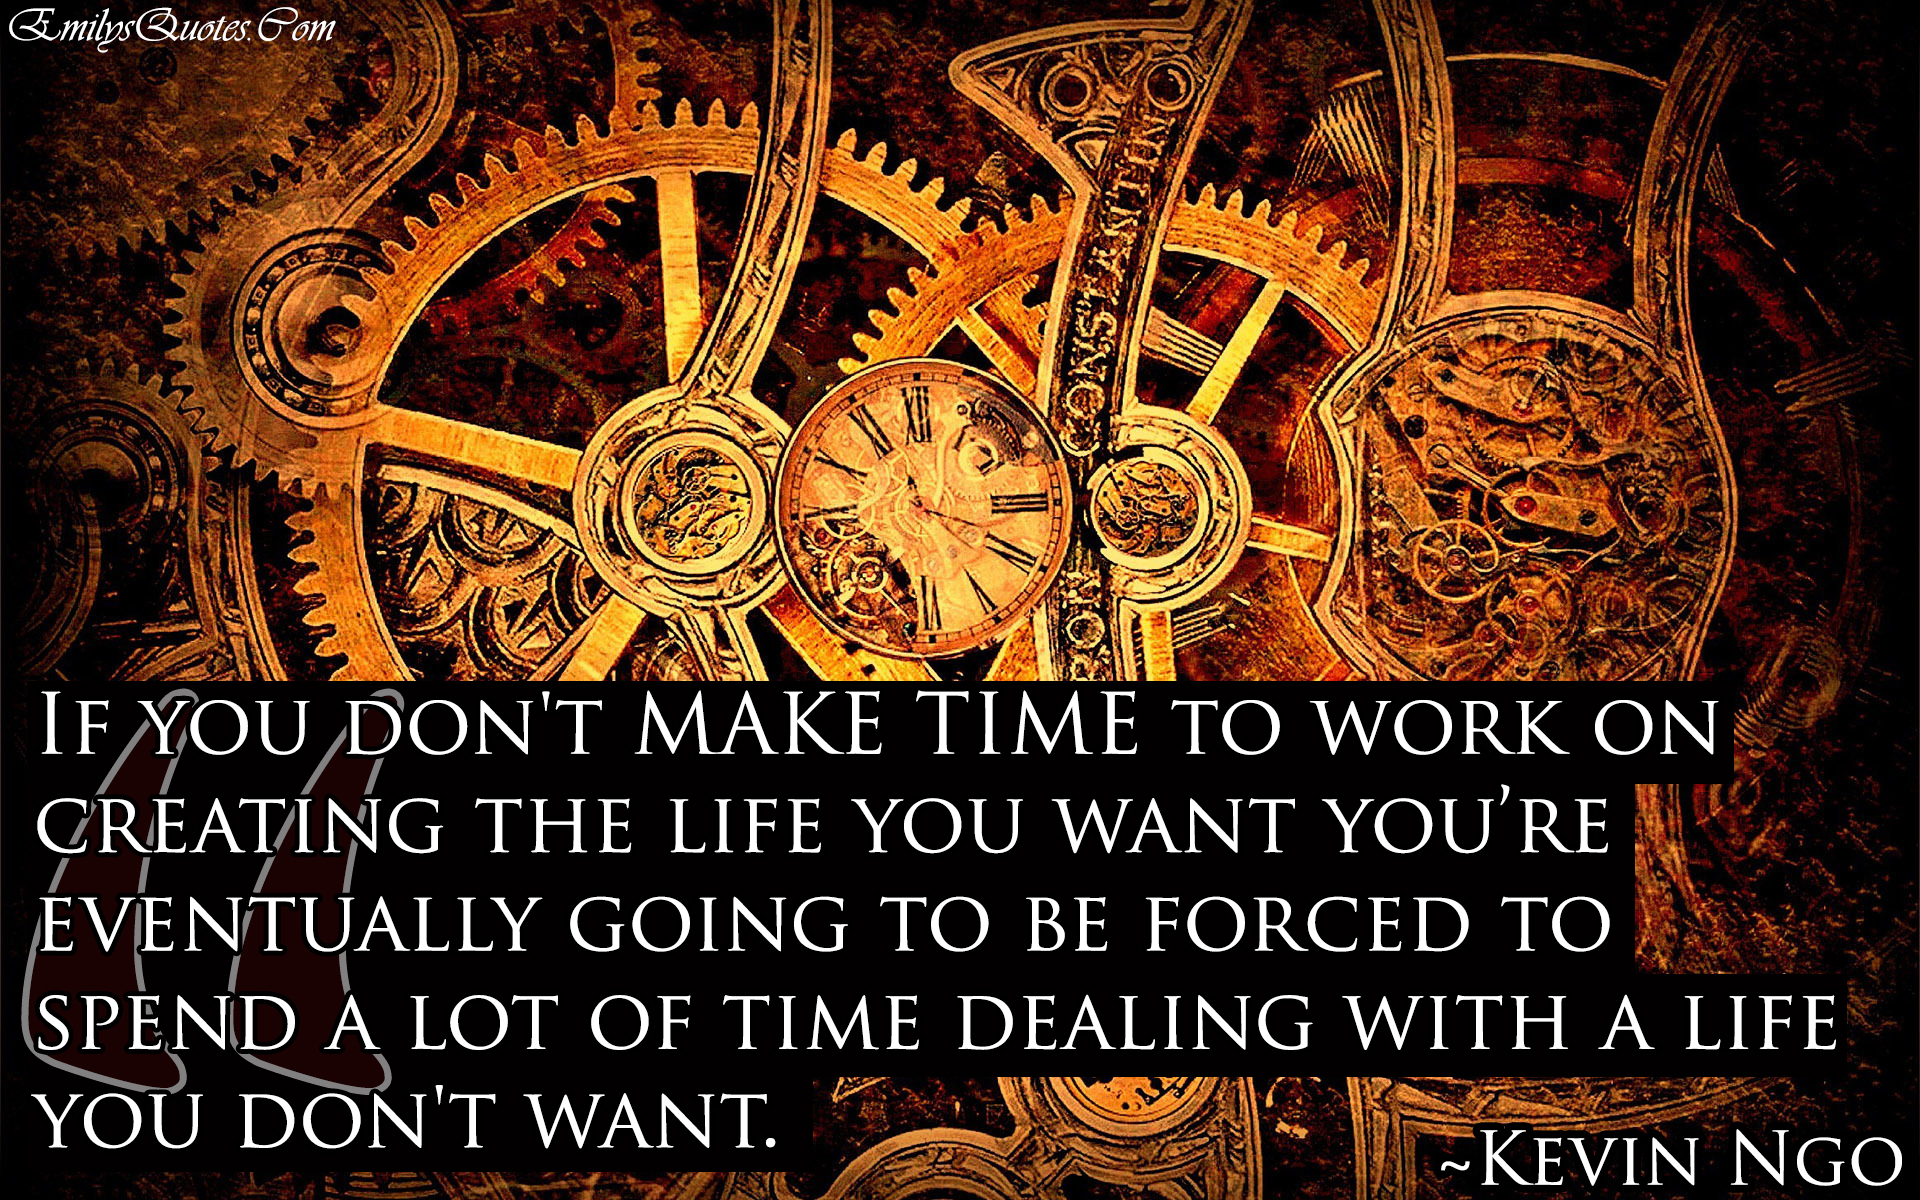 If you don’t MAKE TIME to work on creating the life you want you’re ...